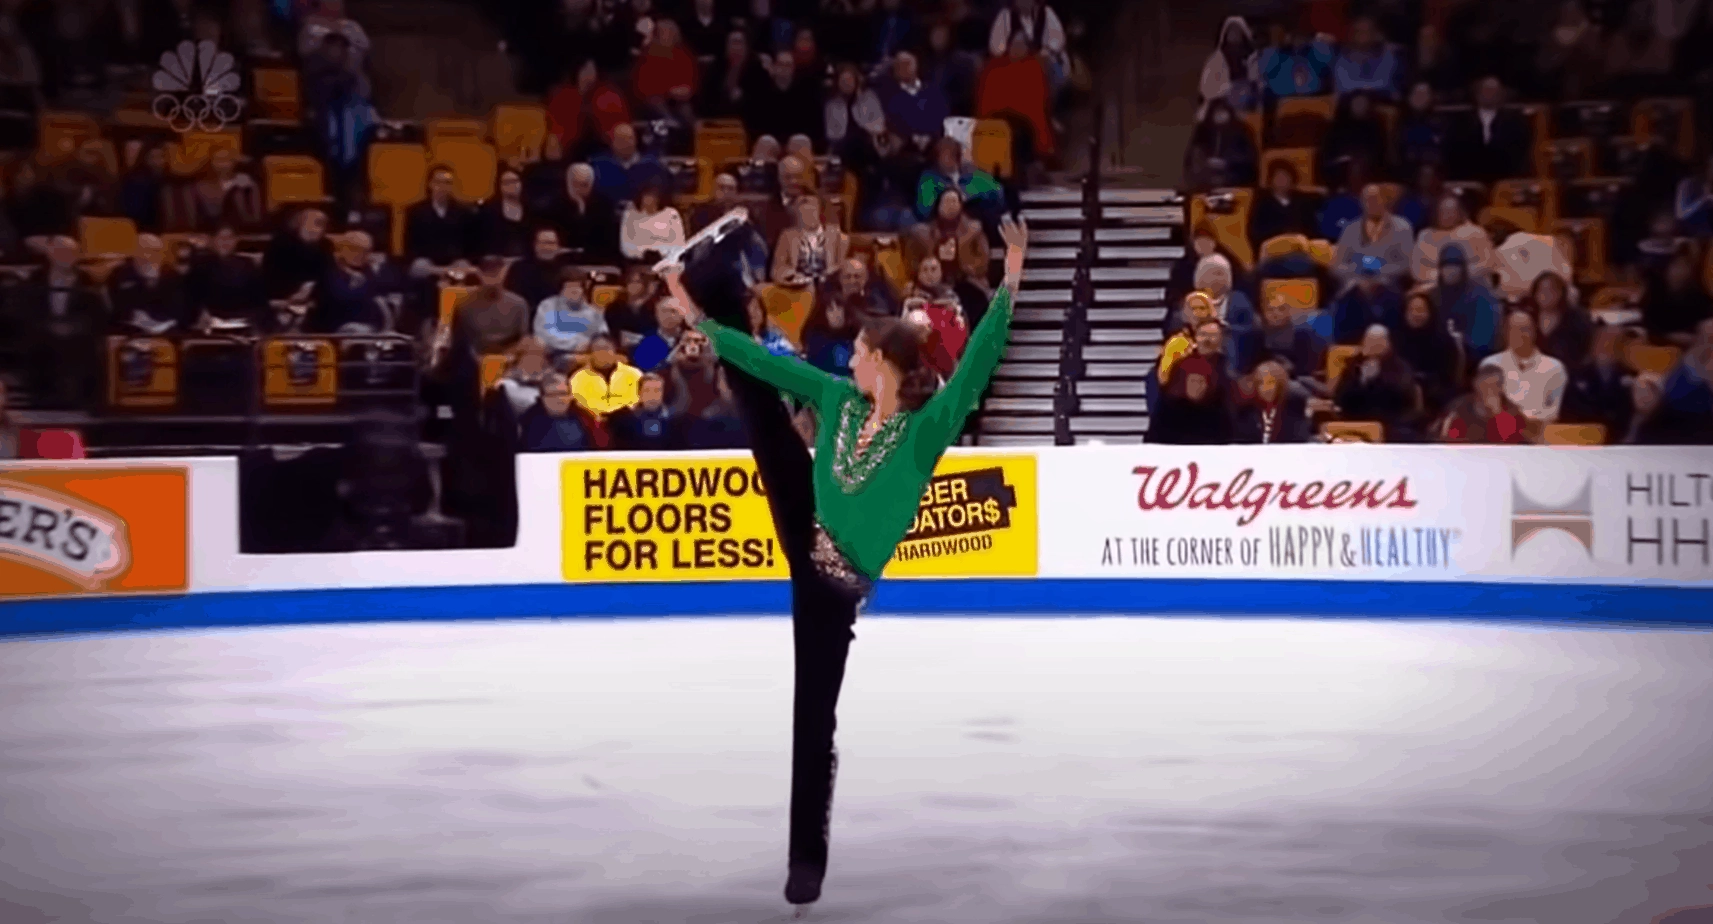 The figure skater made the audience fall in love with him with an Irish dance